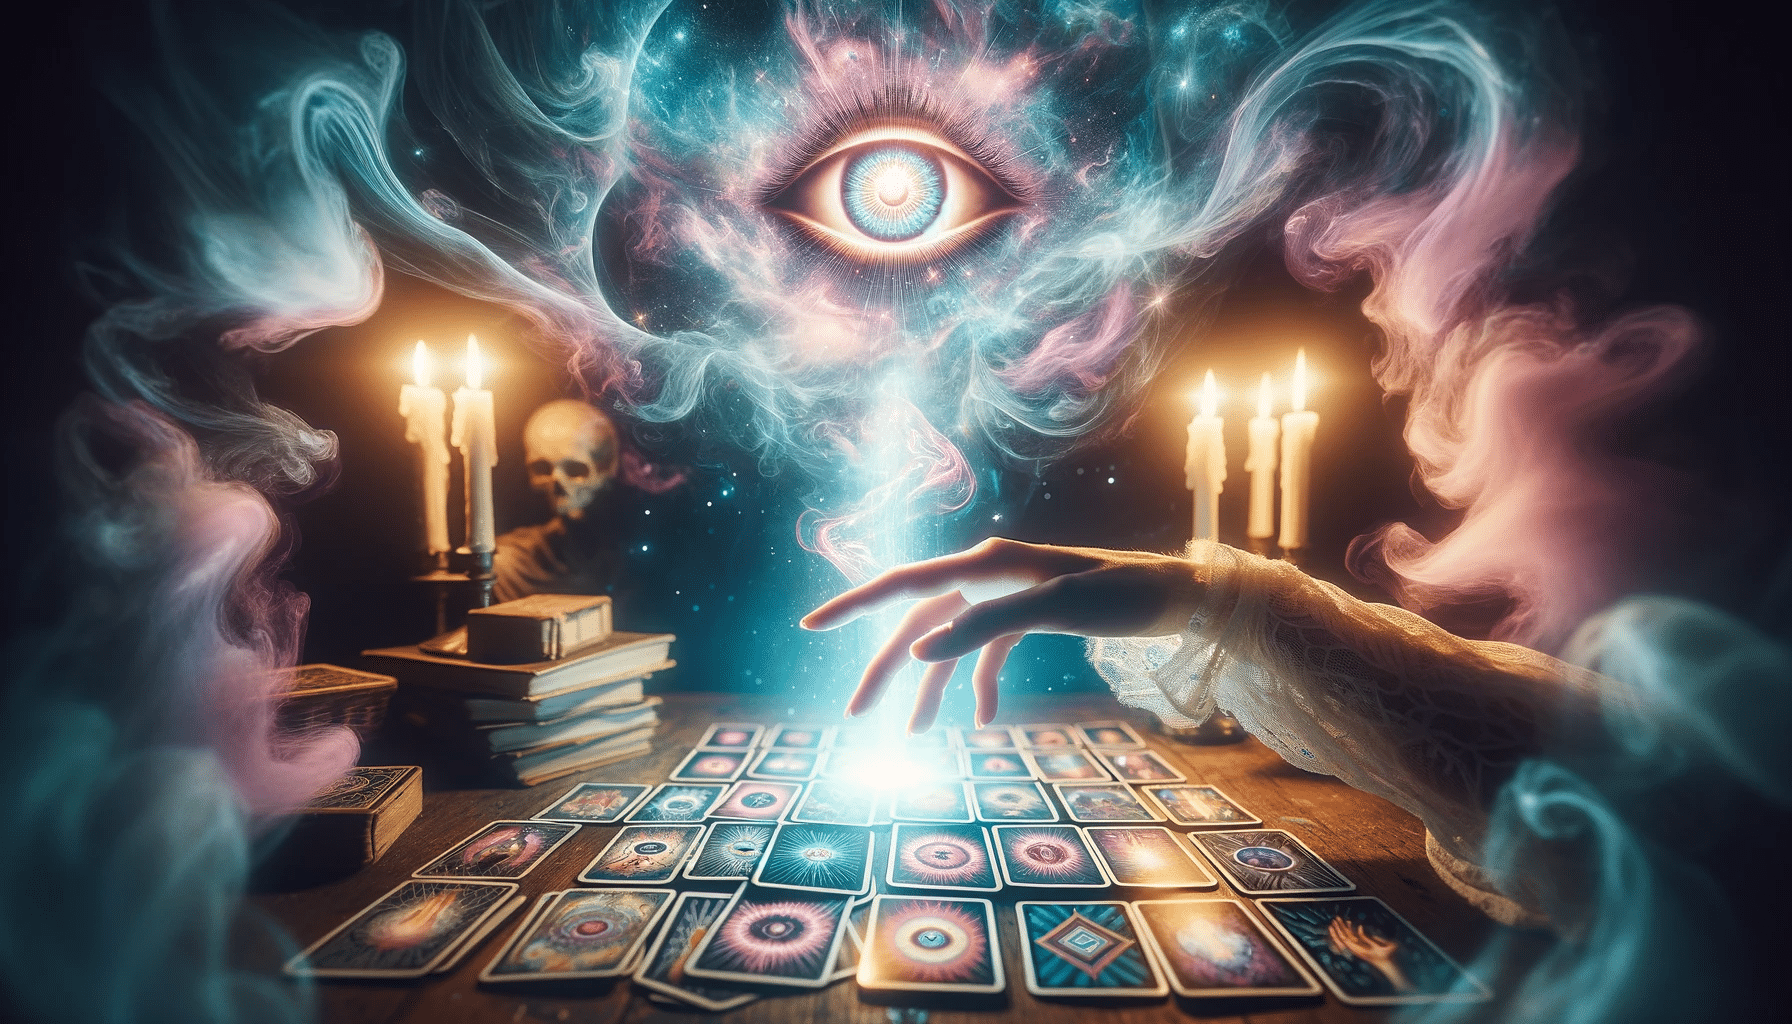 A mystical hand reaches over tarot cards for a psychic interpretation of tarot cards, with a shining third eye and pastel aura.